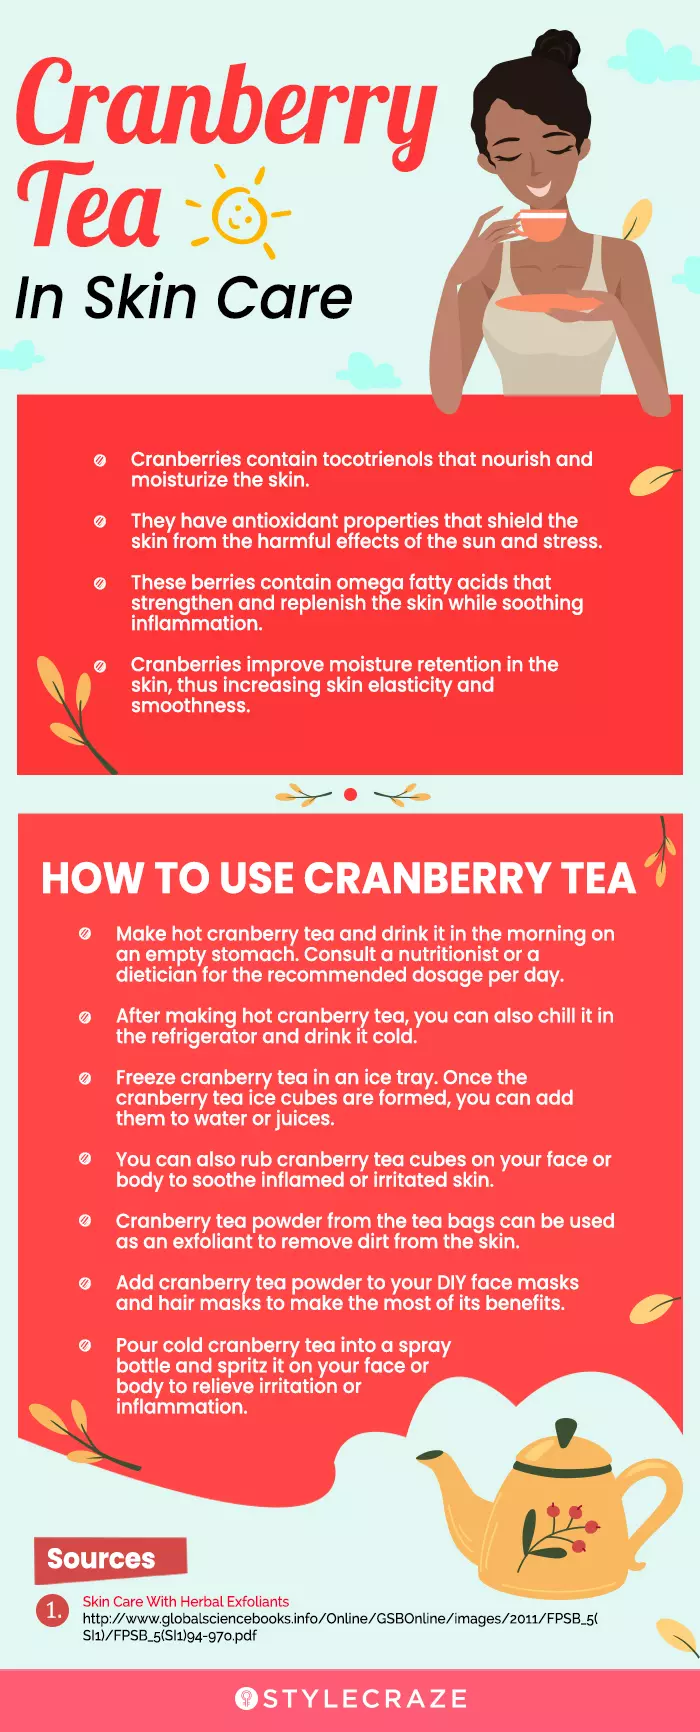 cranberry tea in skin care (infographic)